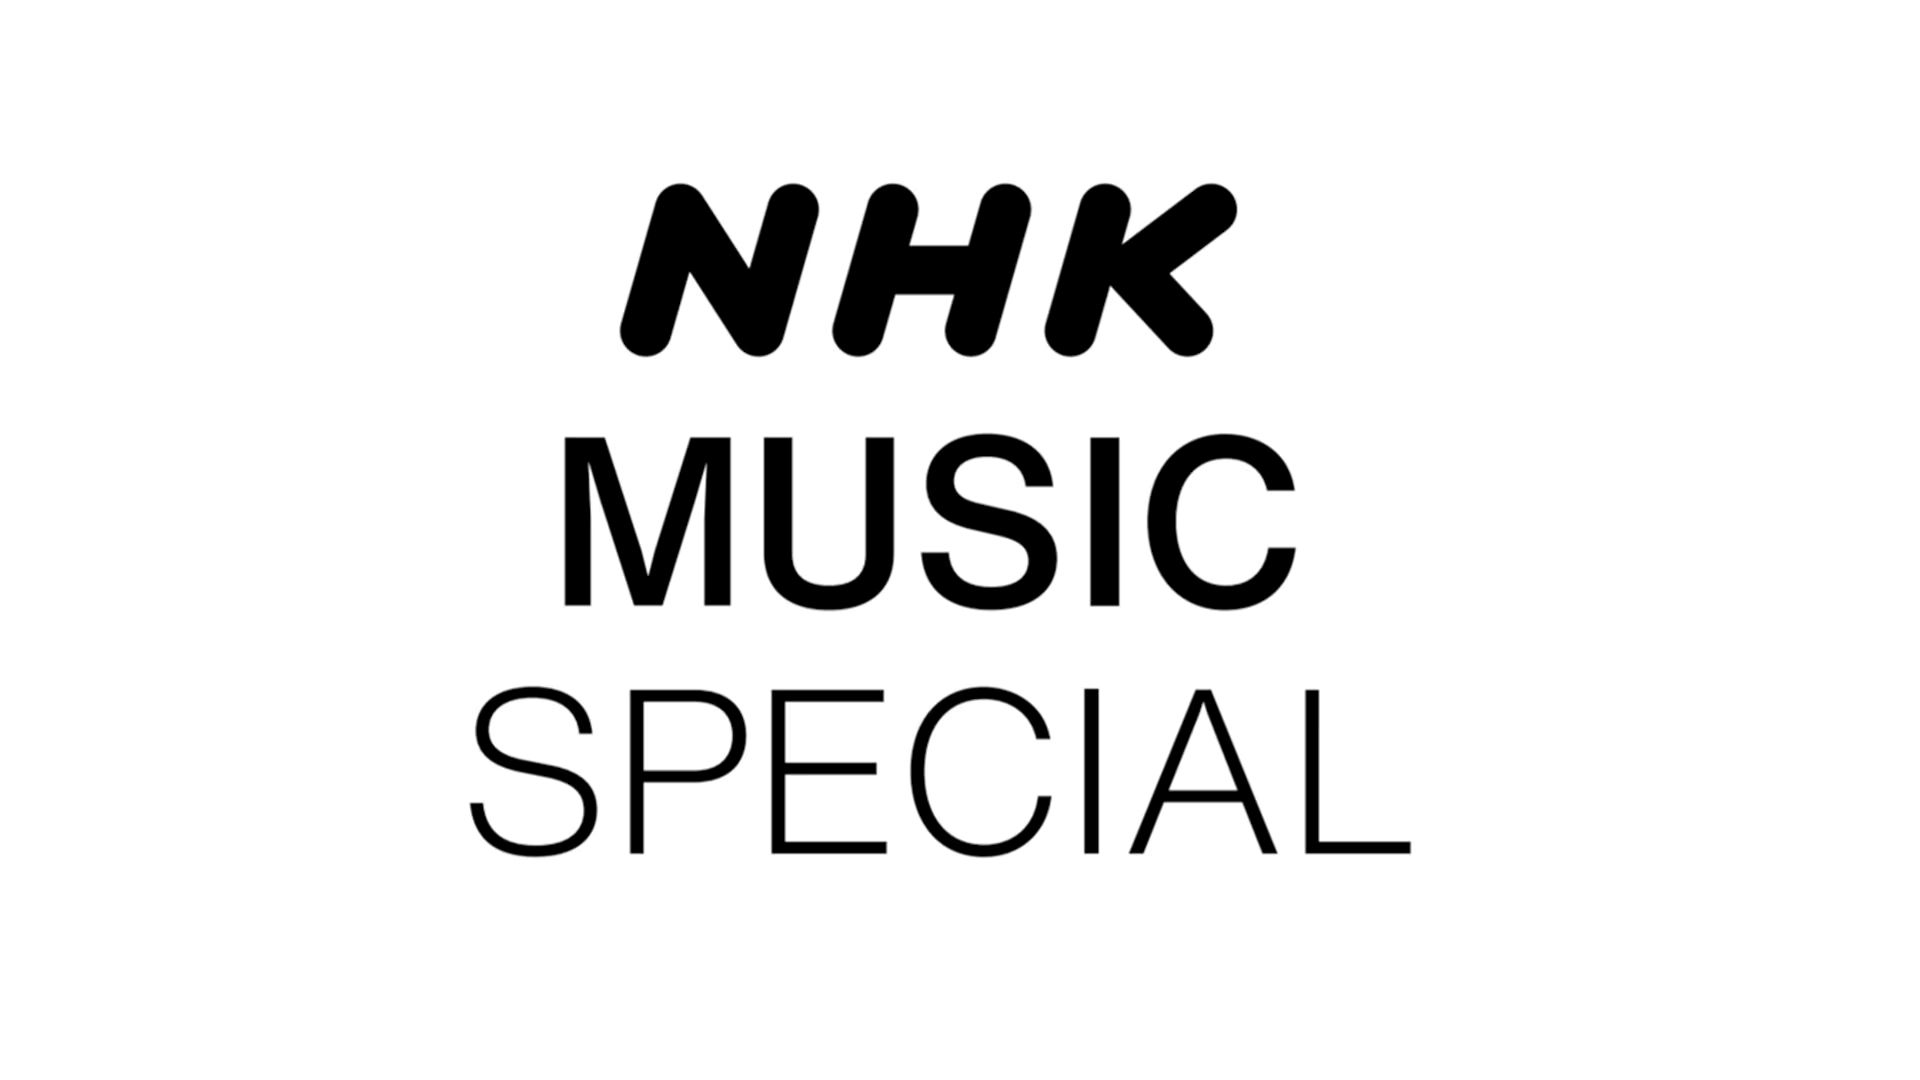 NHK MUSIC SPECIAL